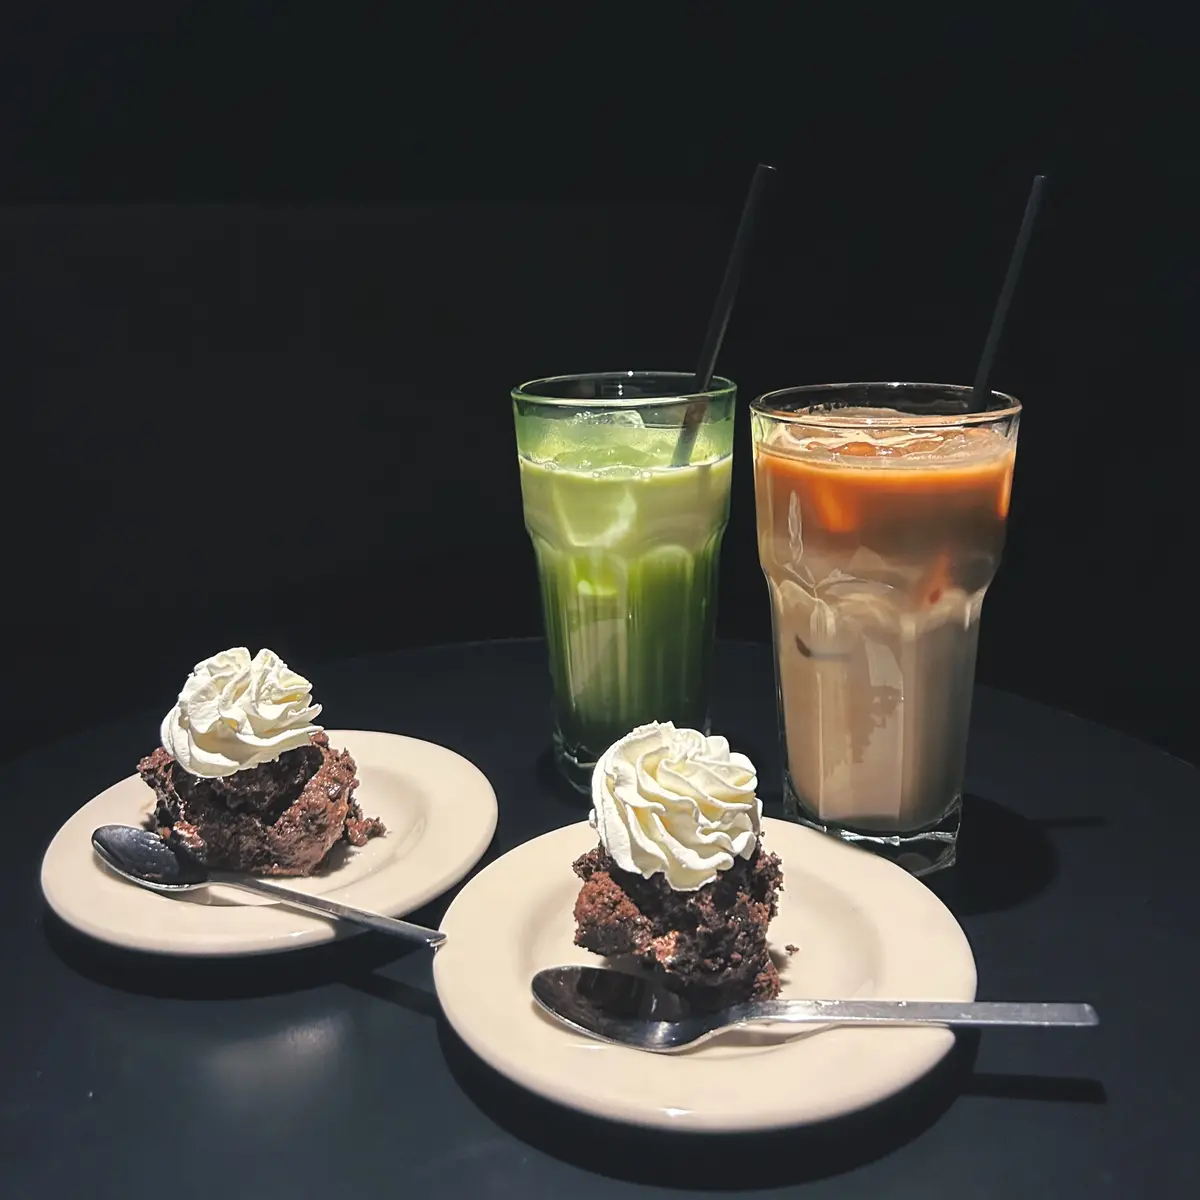 NOTE coffee(note cafe)の抹茶ラテ、キャラメルラテ、チョコレートケーキ